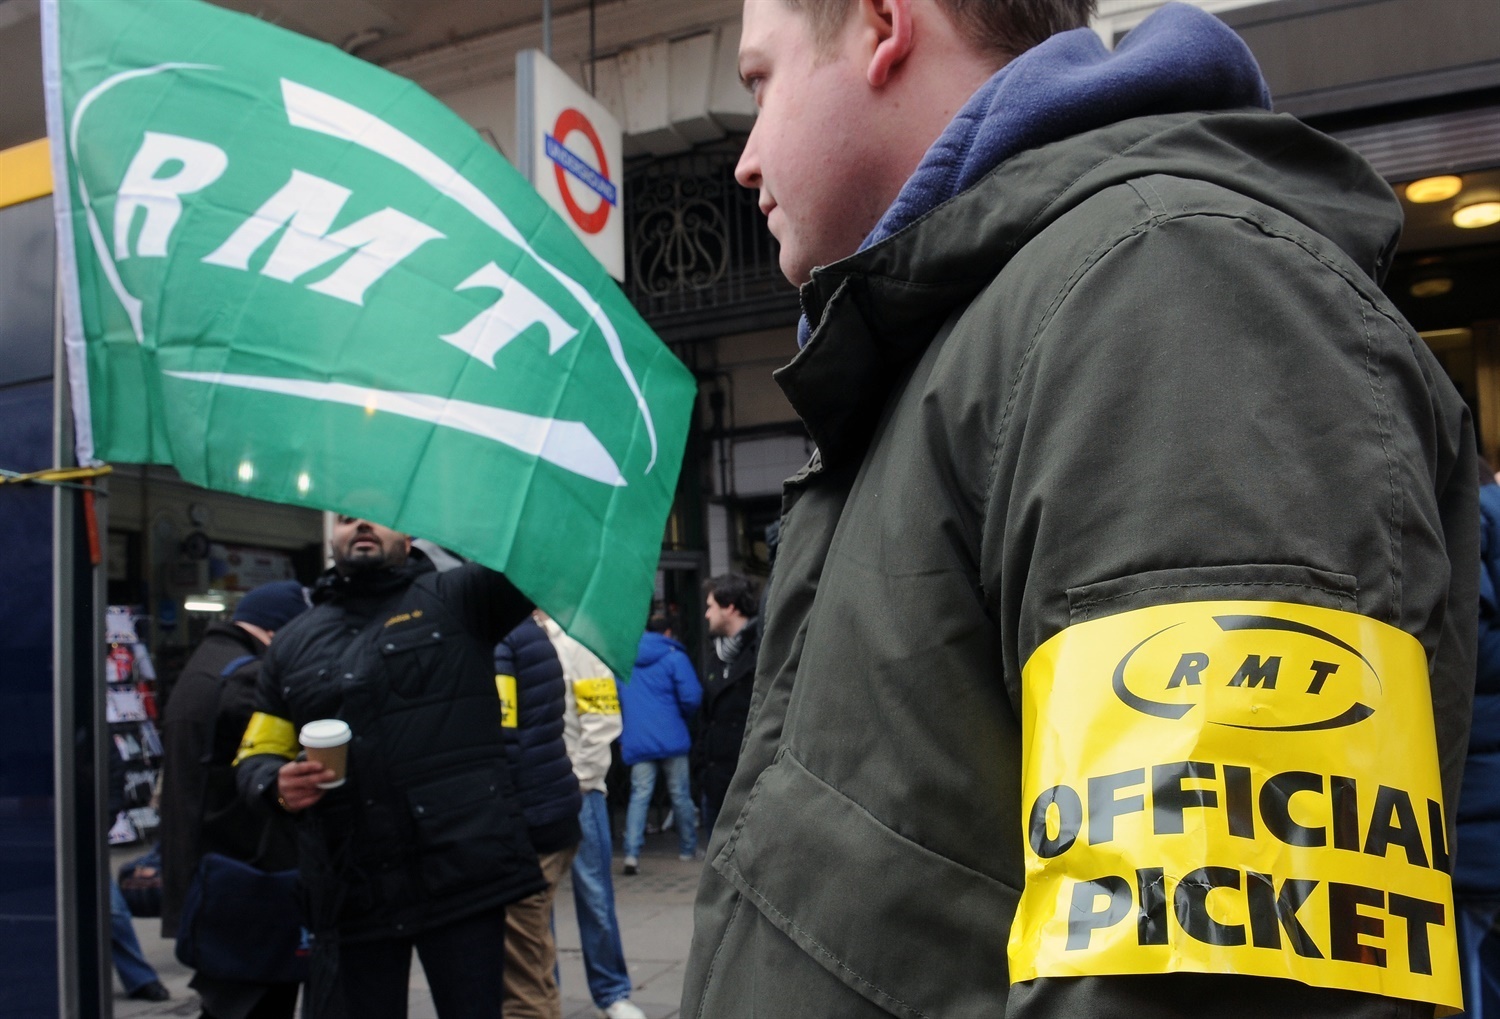 Southern and RMT return to negotiating table